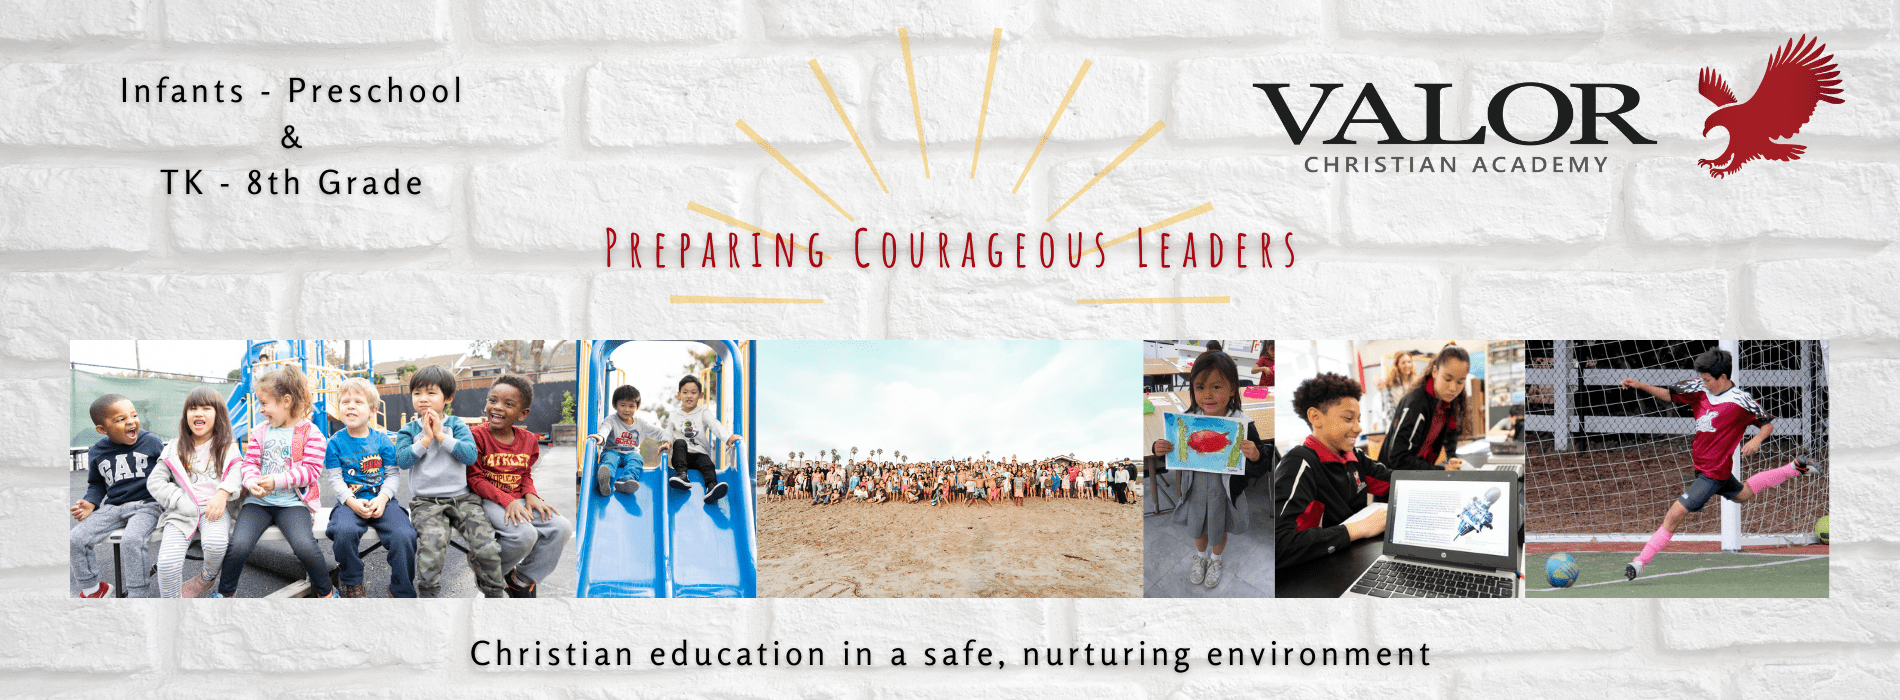 Valor Christian Academy - Preparing Courageous Leaders - Infants - preschool and TK - 8th Grade